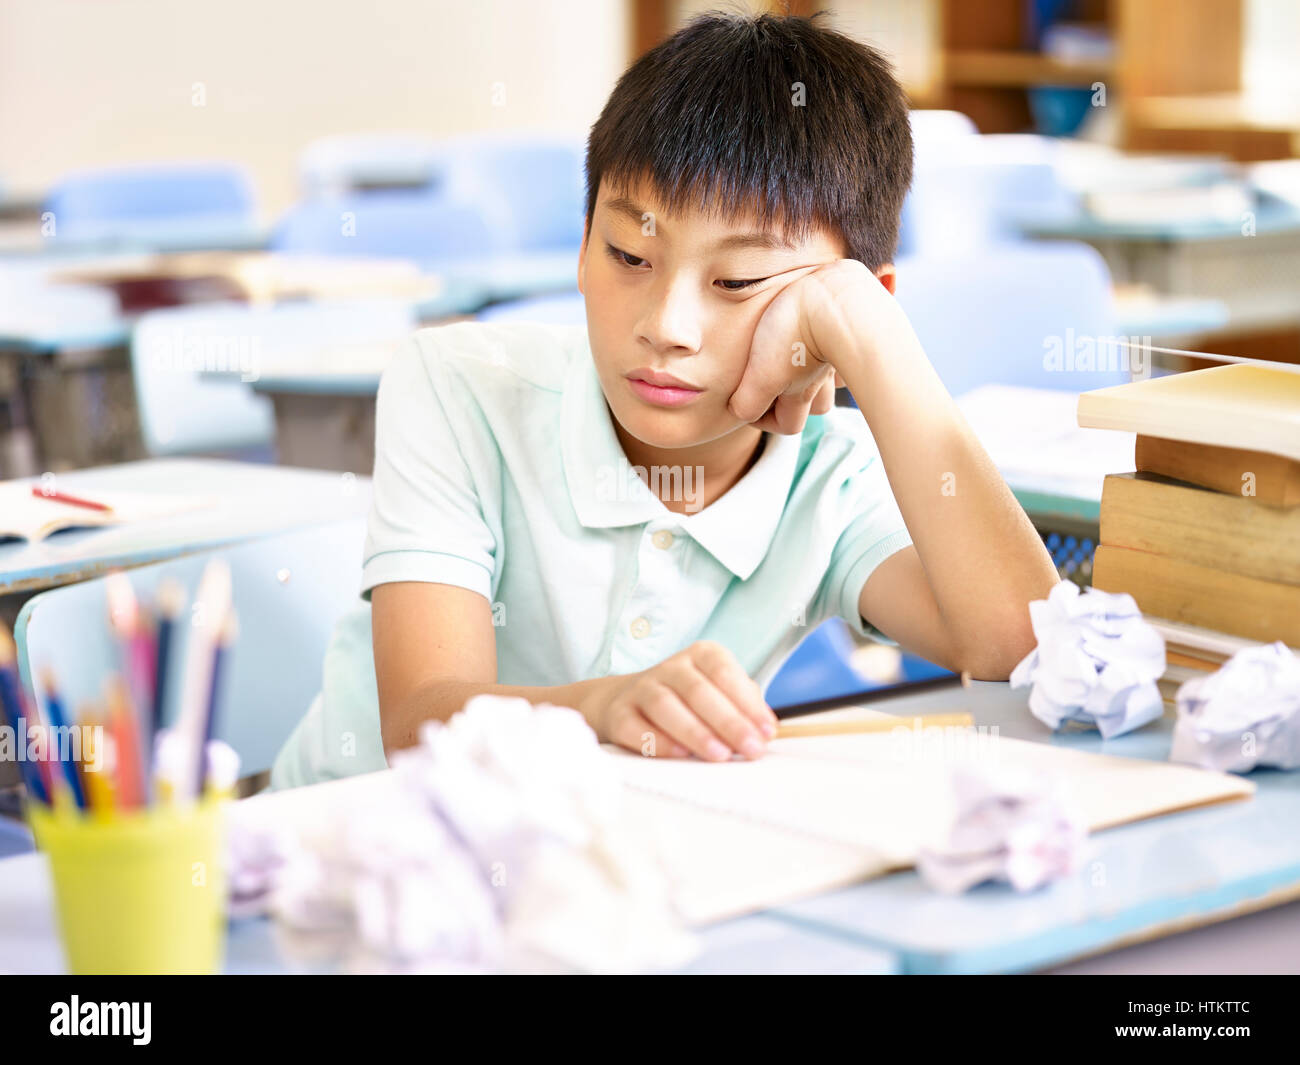 frustrated asian pupil sitting at desk dazing Stock Photo